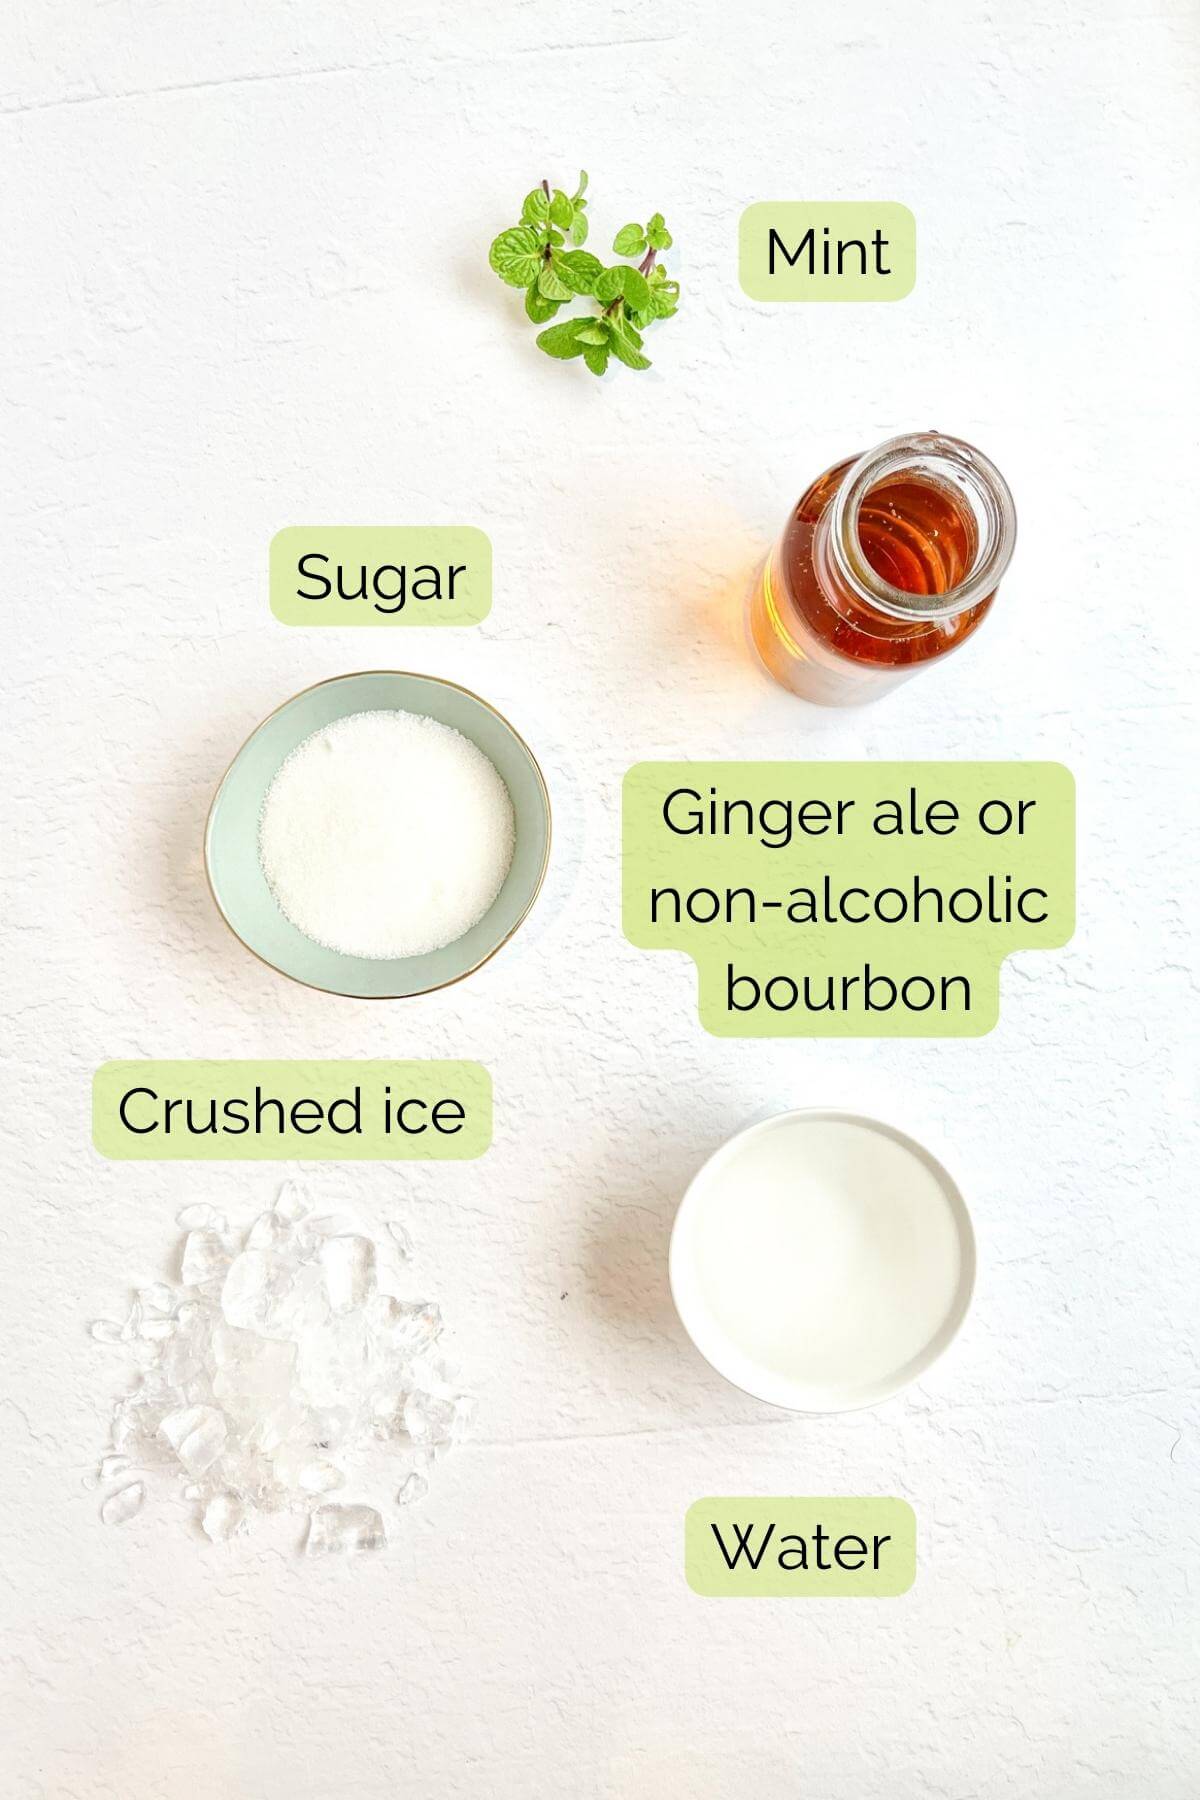 ingredients for a non alcoholic mint julep including fresh mint, sugar, ginger ale, sugar and crushed ice